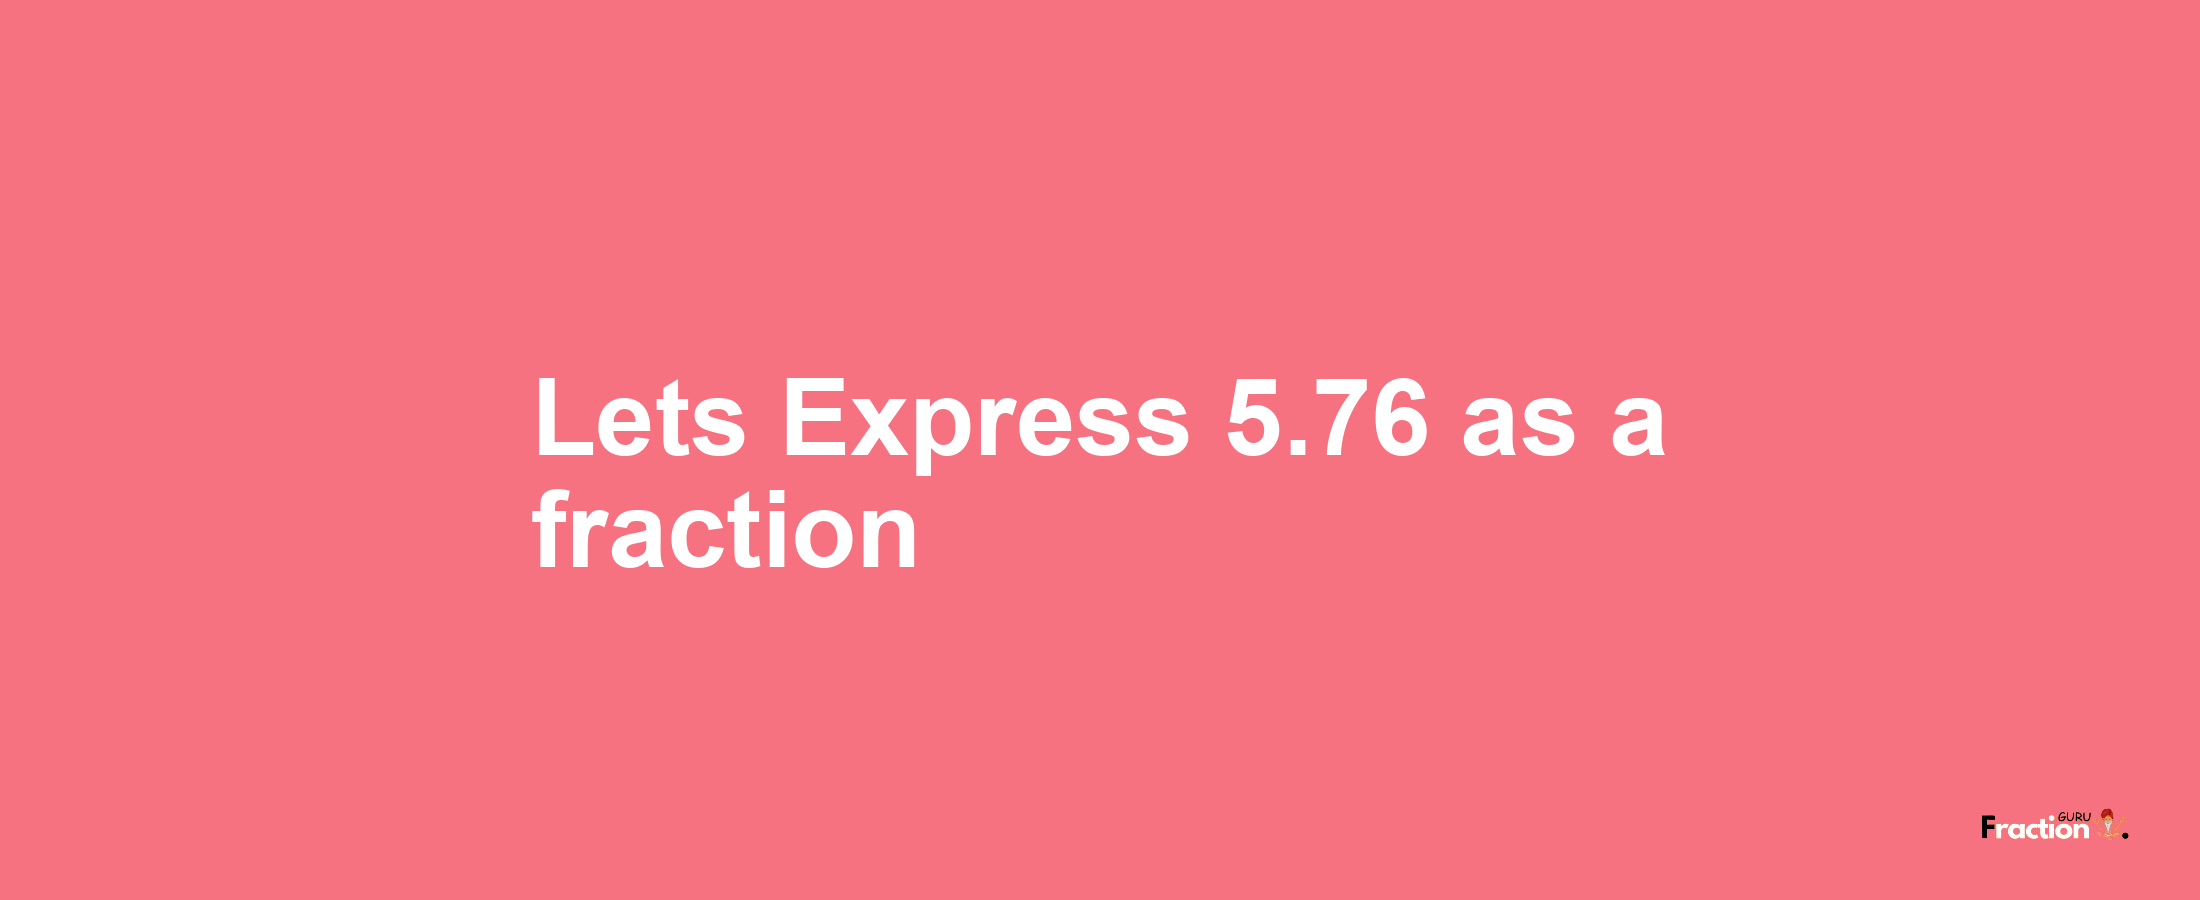 Lets Express 5.76 as afraction